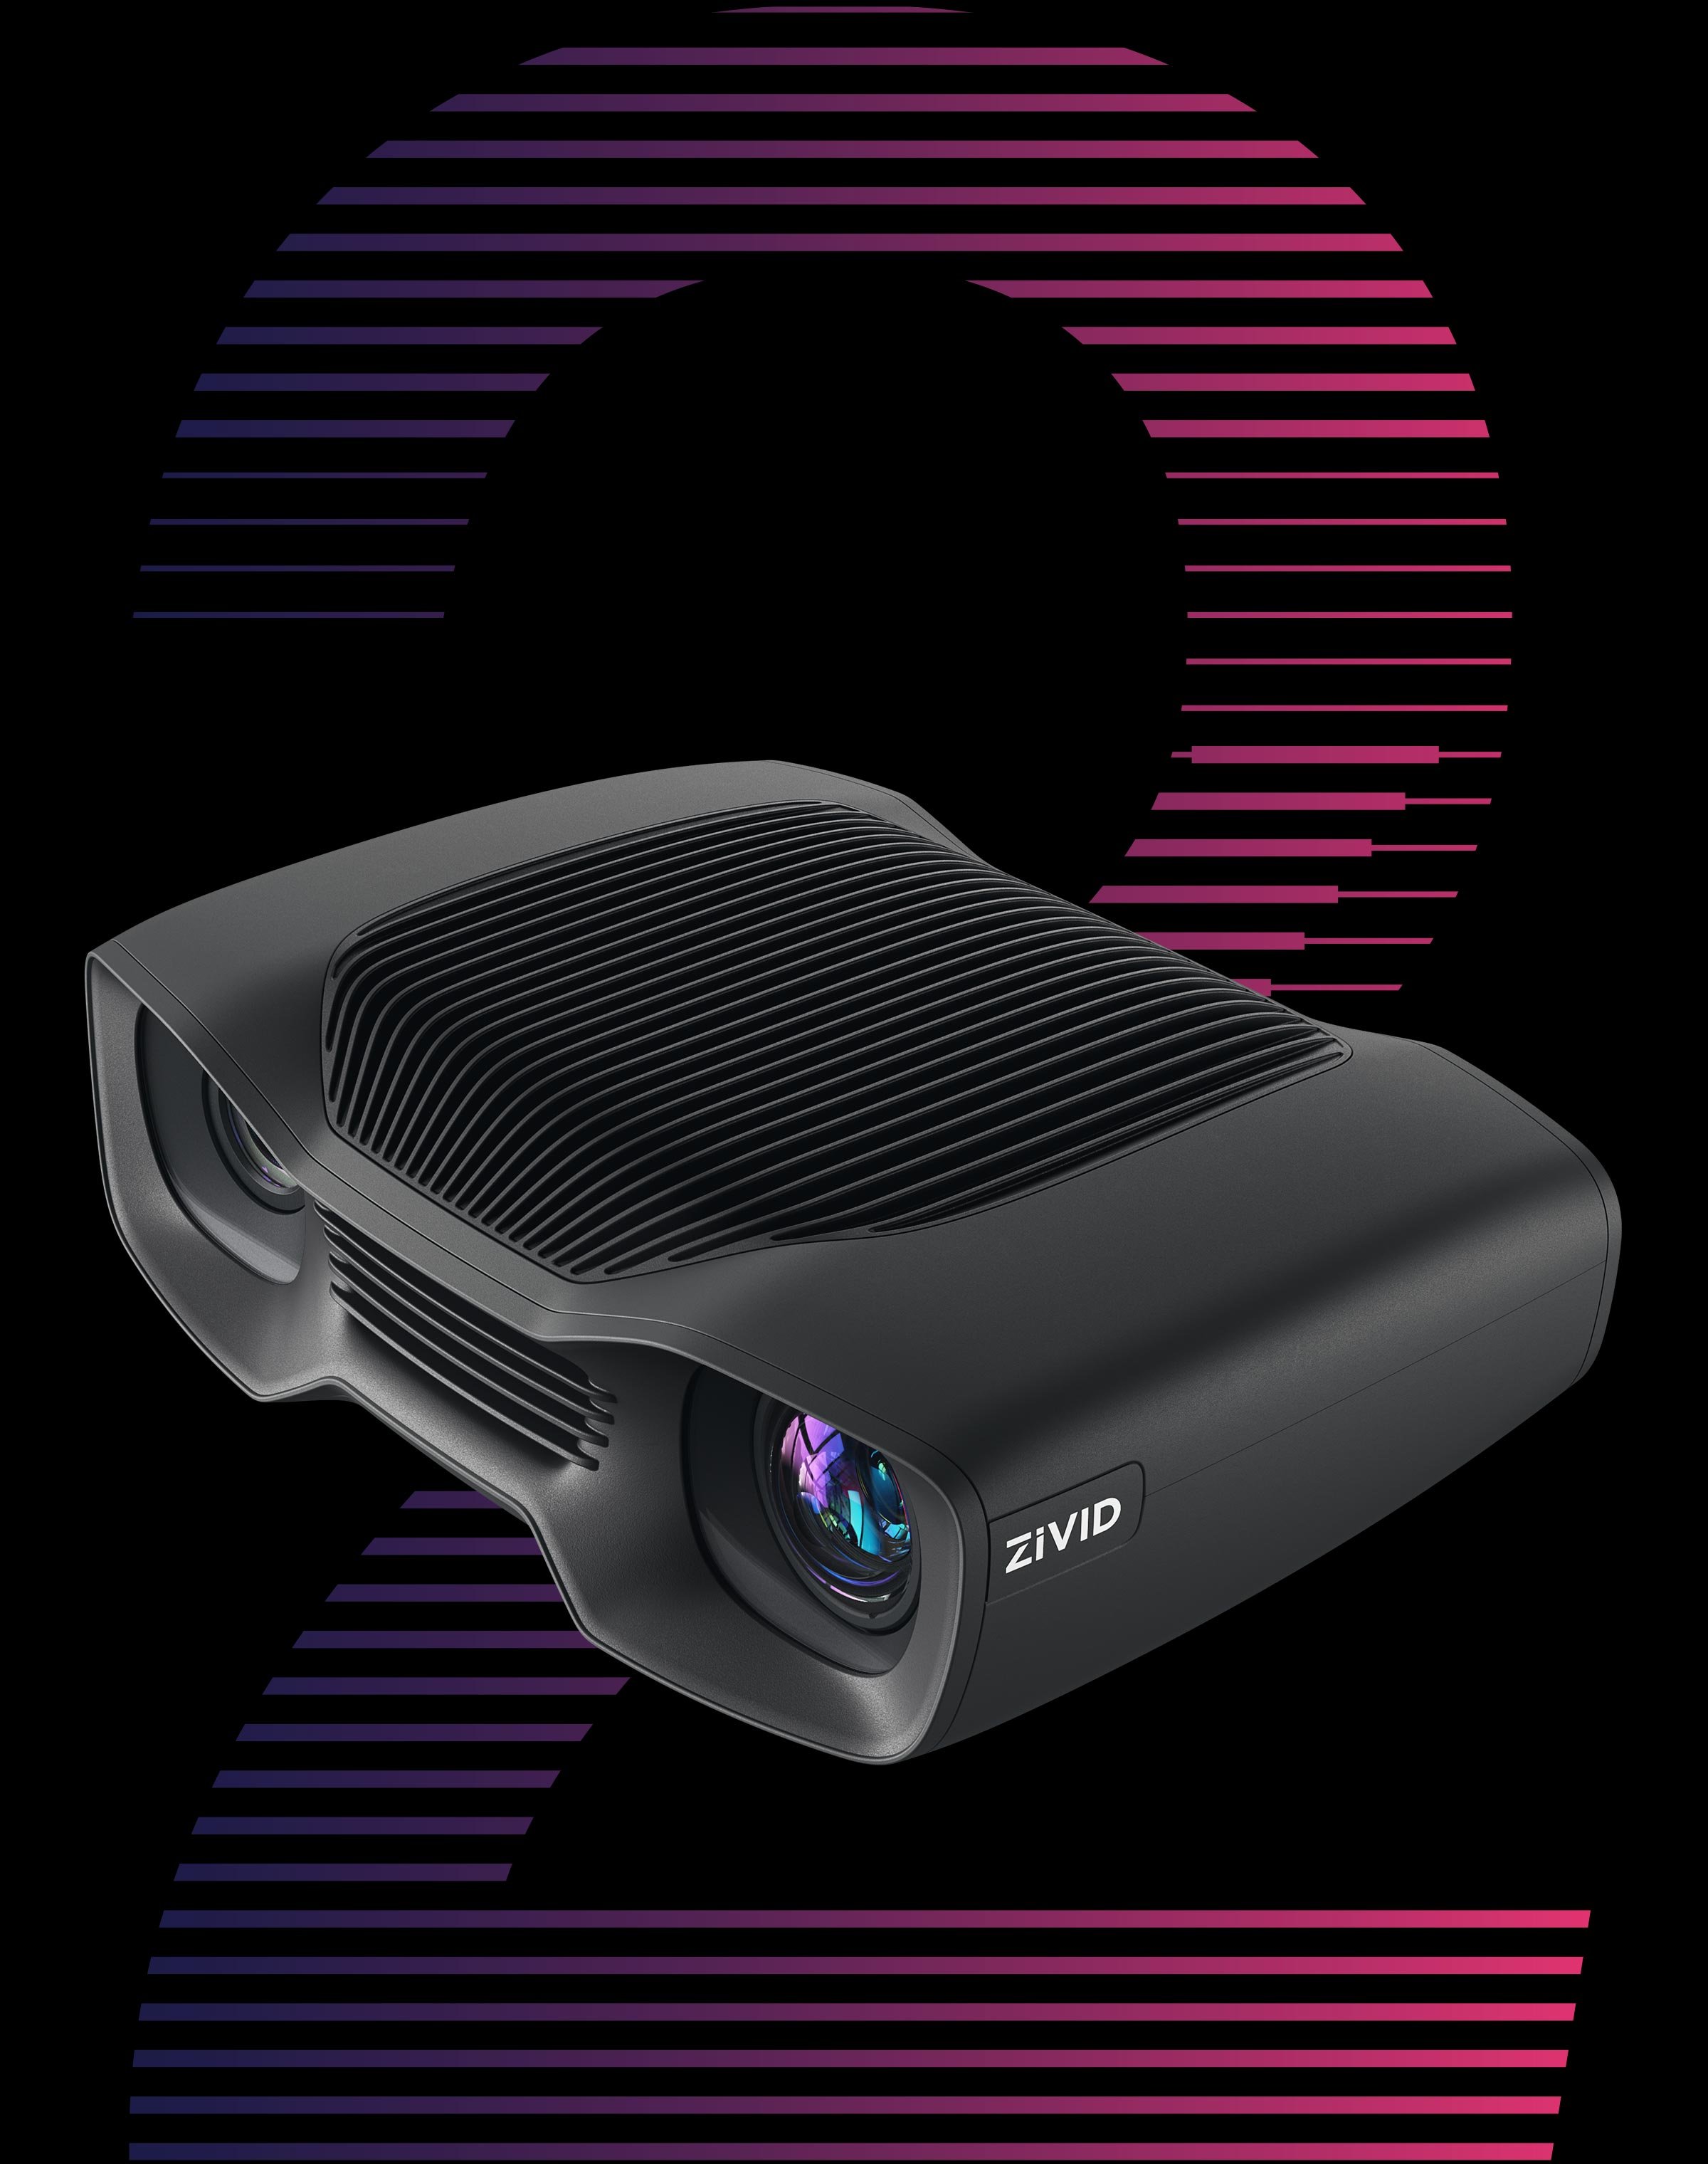 Zivid Two Industrial 3D color camera for bin-picking, assembly, and machine tending.